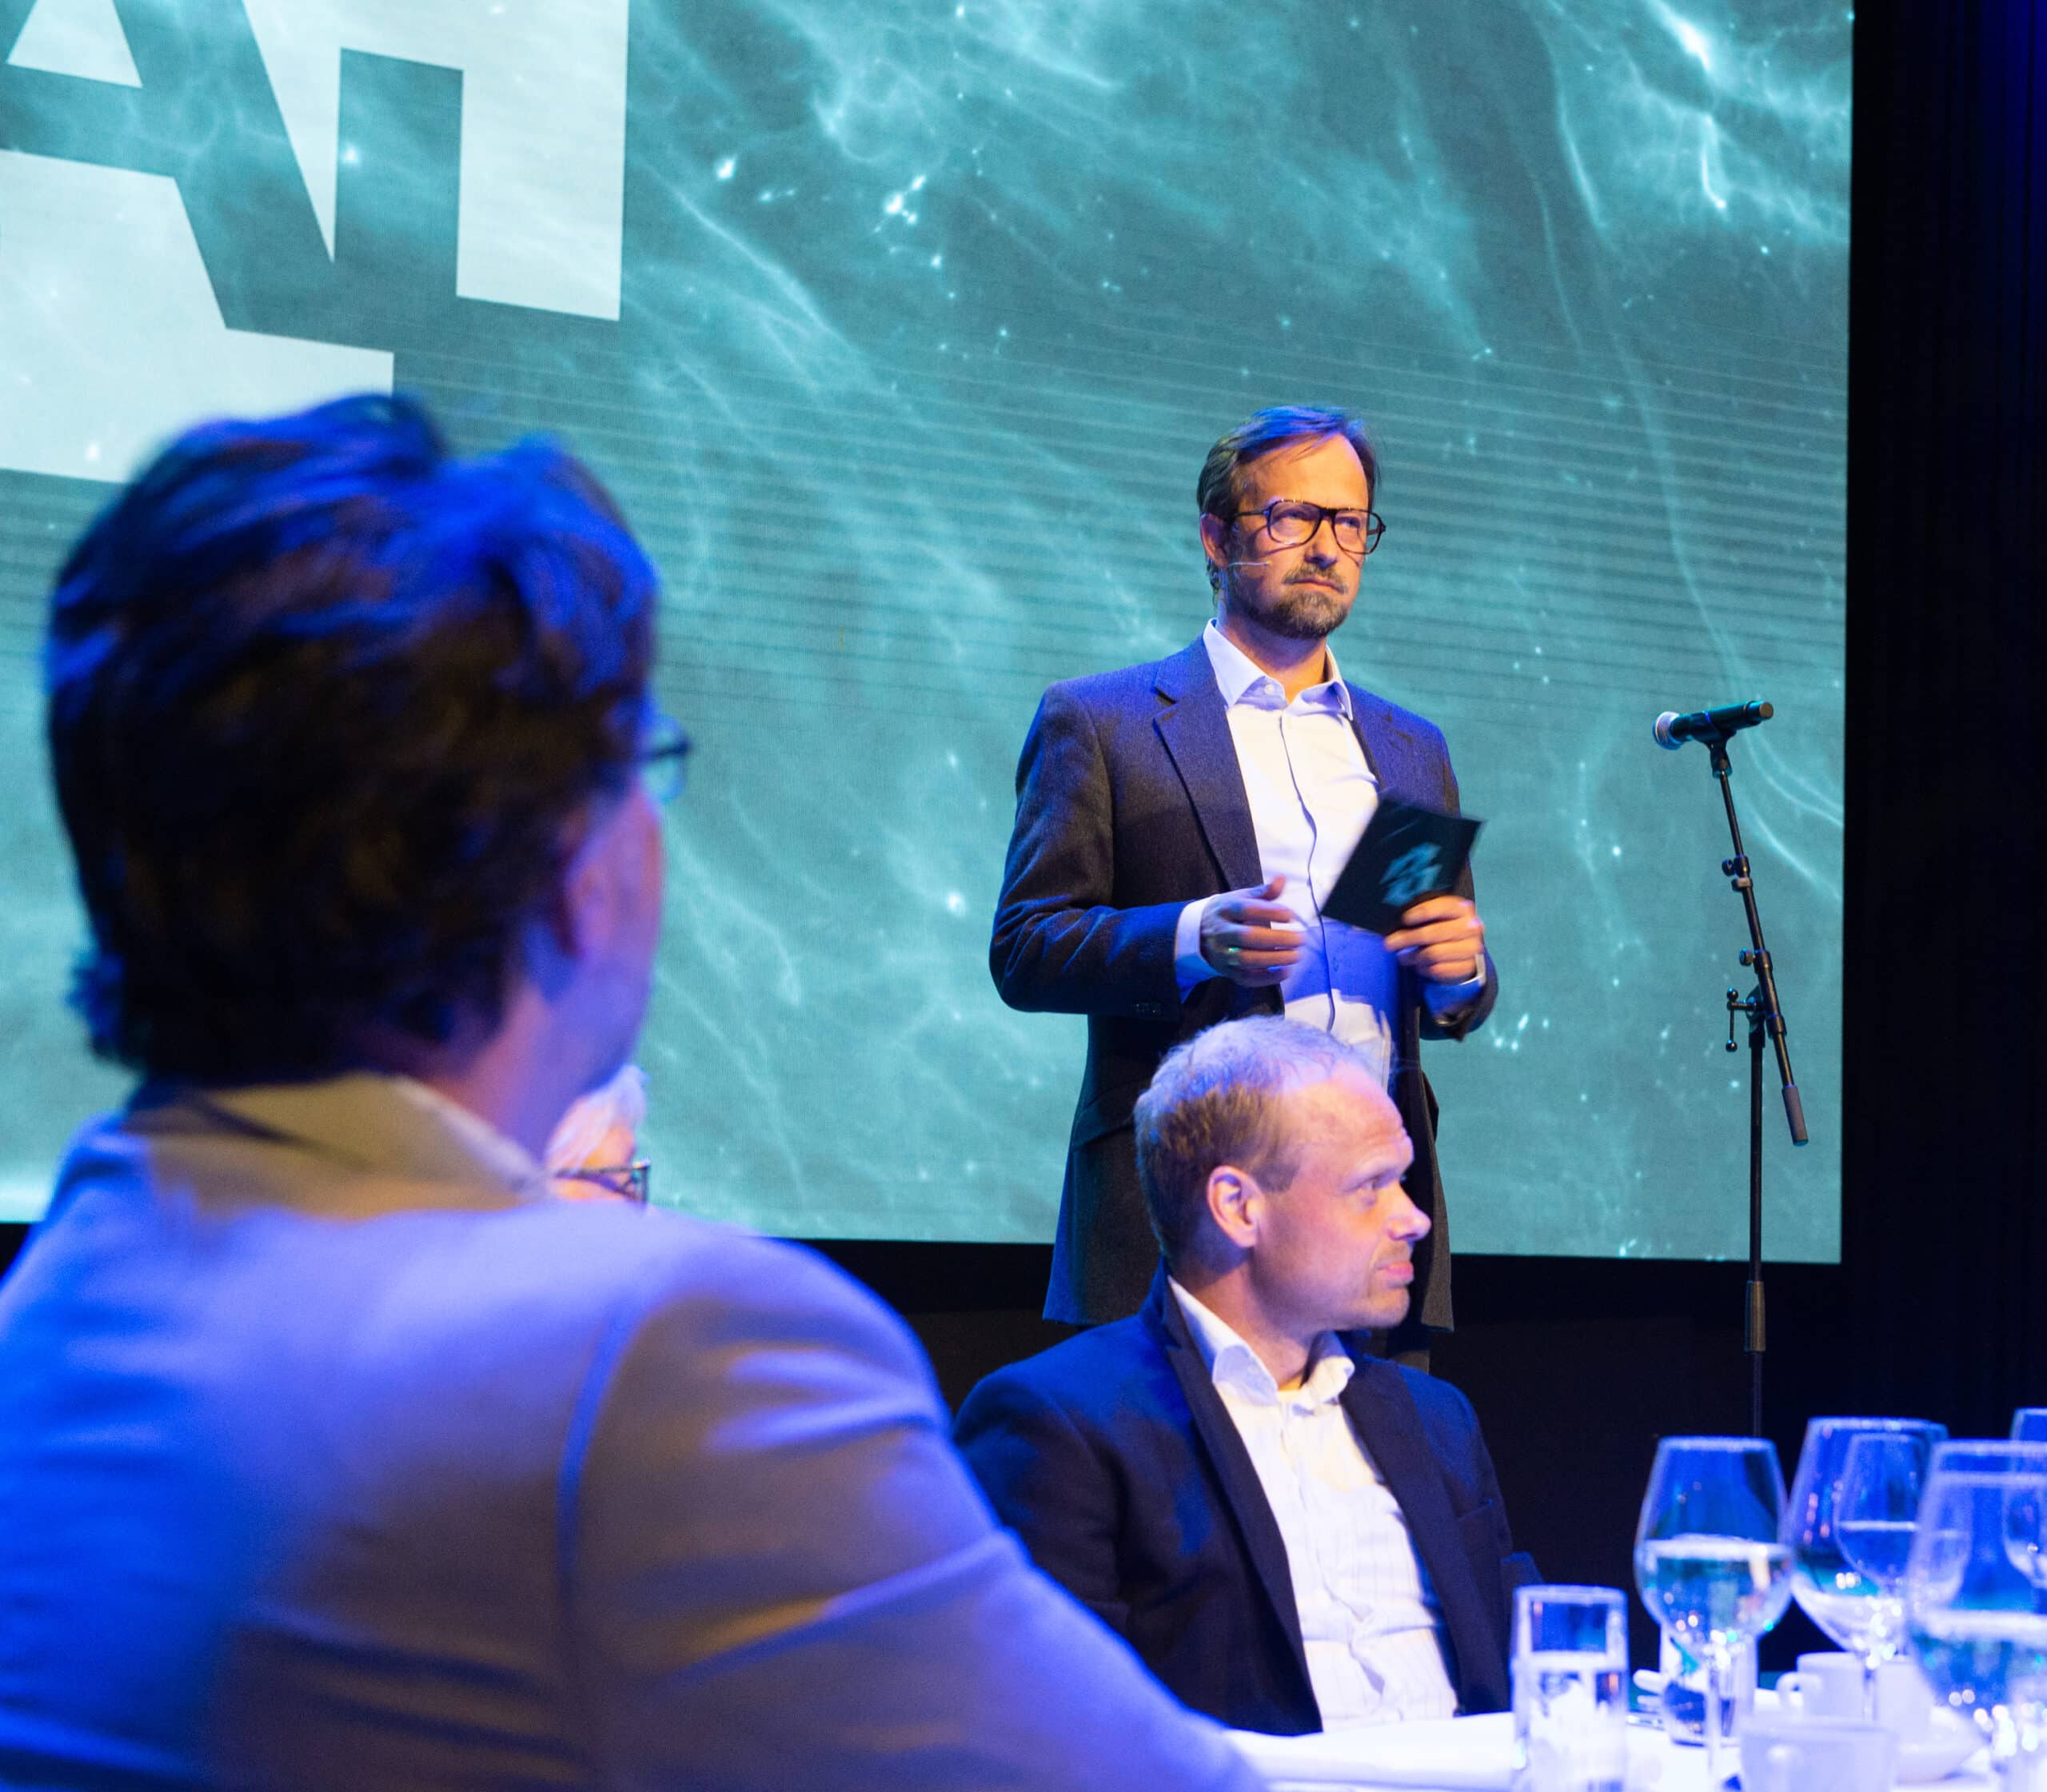 Tore Lie is the Cluster for Applied AI manager at Smart Innovation Norway. PHOTO: Stein Johnsen, Contentvideo.no